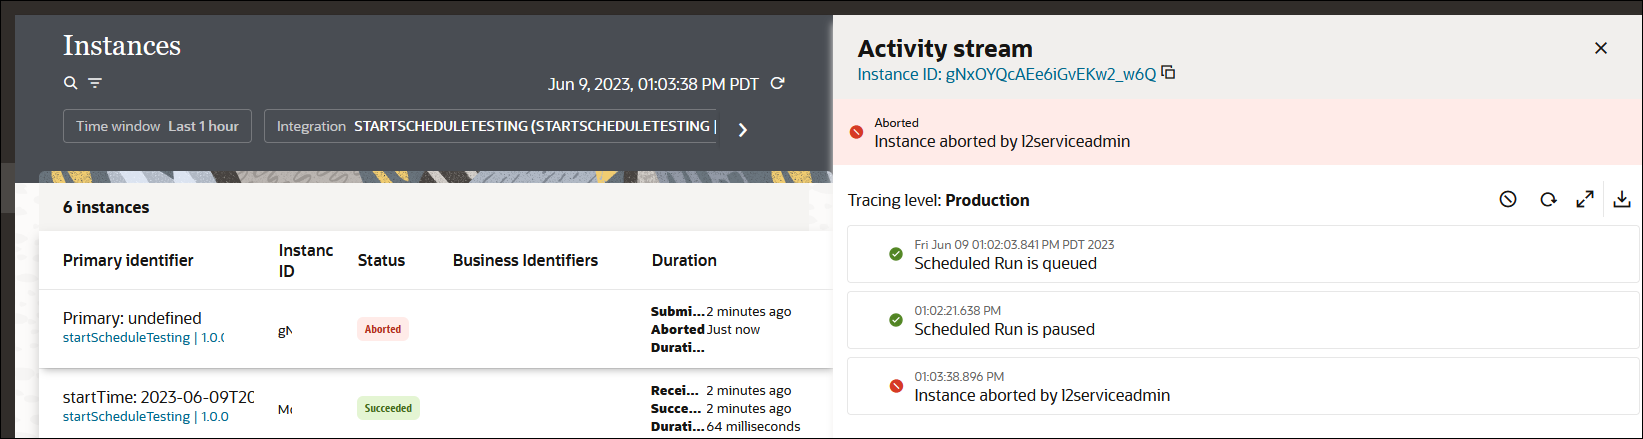 The activity stream shows details about the milestones of the instance flow. For this example, the last entry indicates that the instance was aborted. Reasons are provided. The view details icon appears next to milestones for which the message payload can be viewed. The download payload link appears at the upper right.